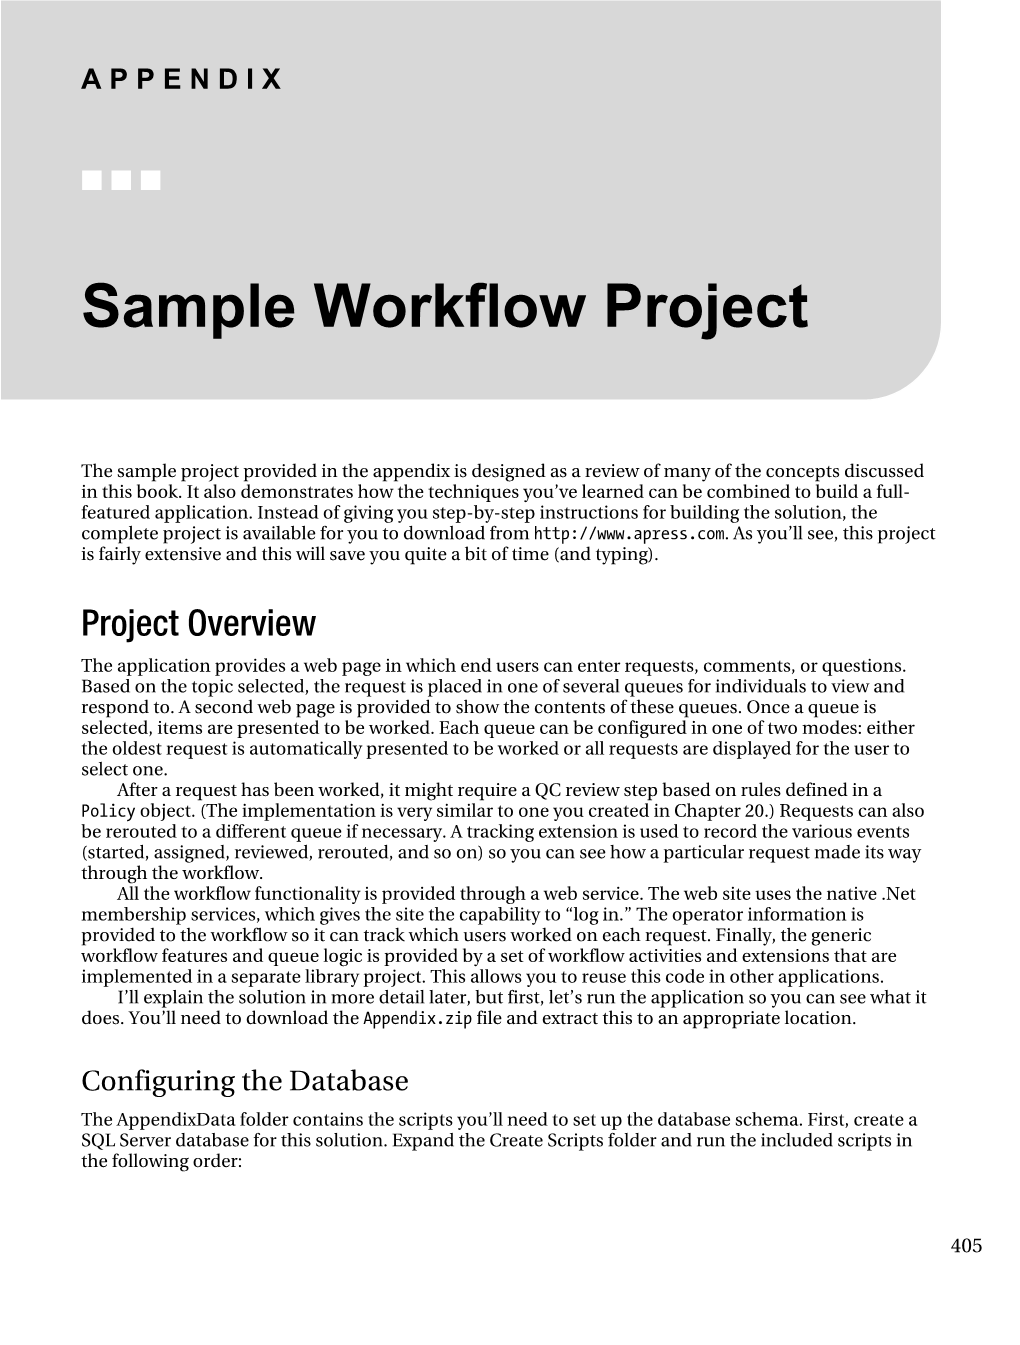 Sample Workflow Project